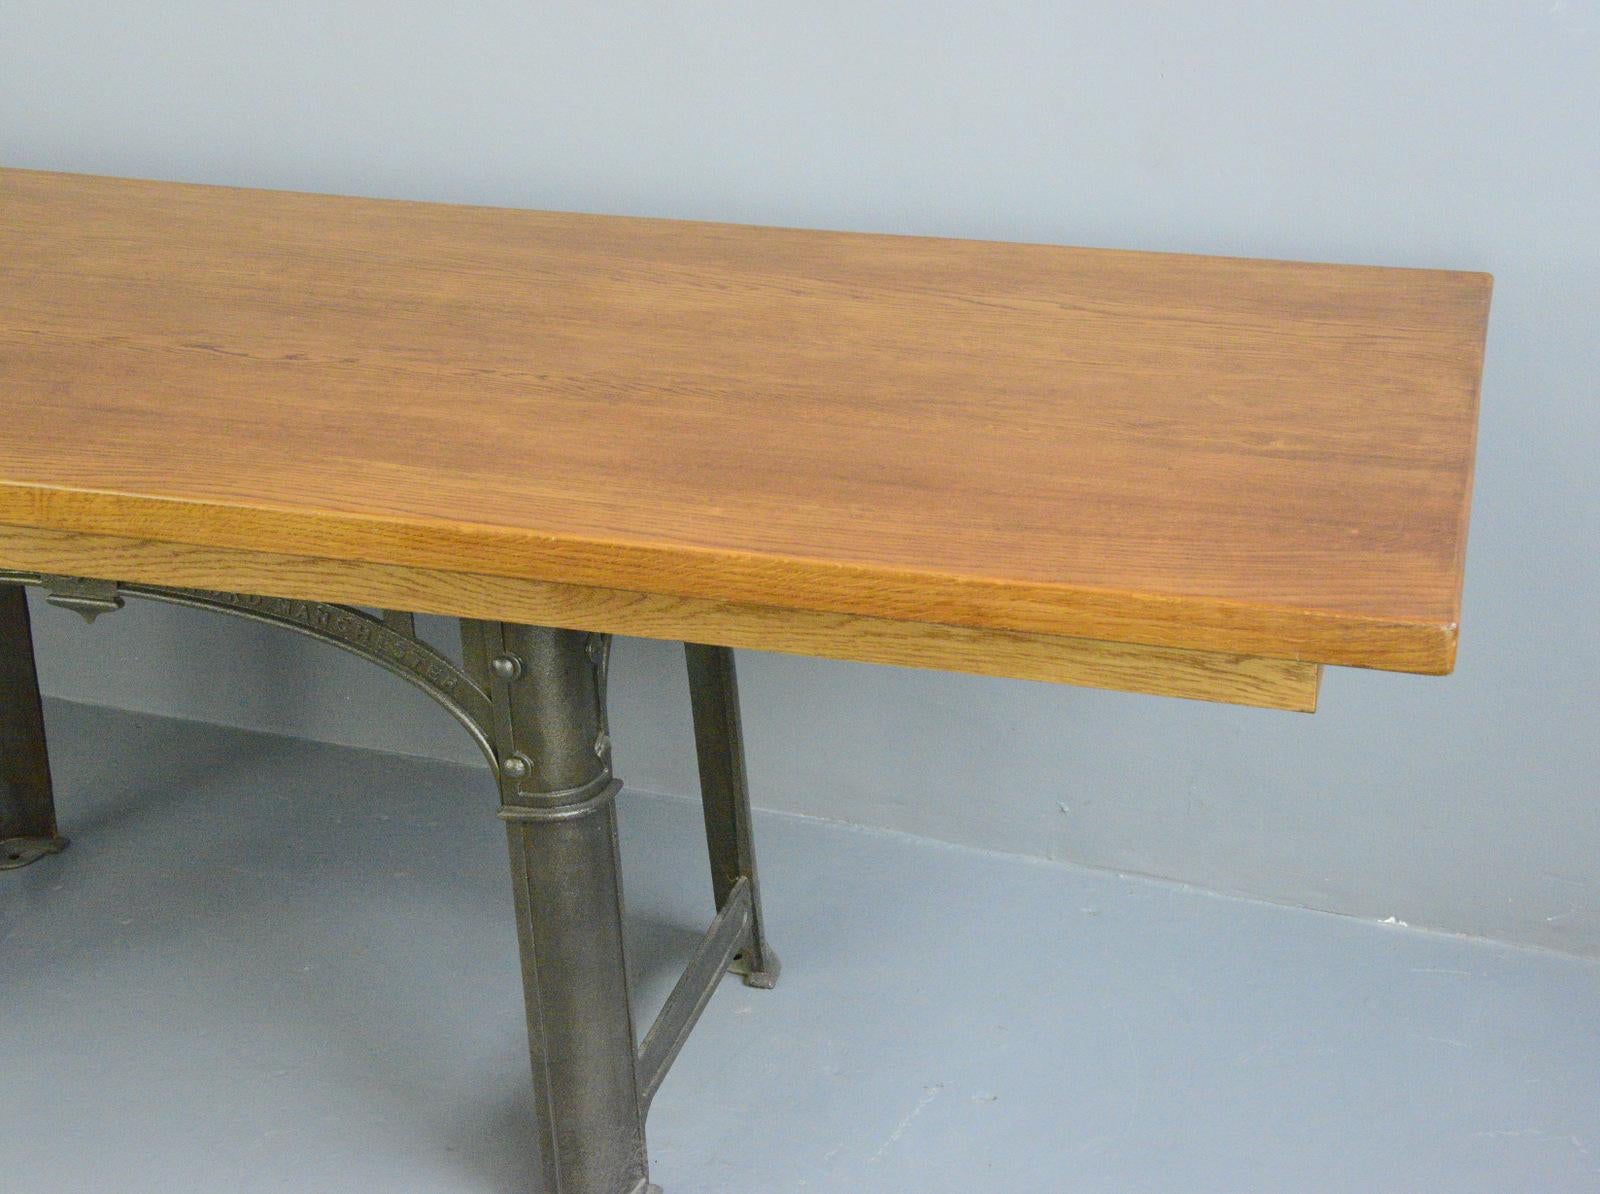 Large Industrial table by Richmond & Chandler, Circa 1910

- Solid oak top
- Cast iron viaduct design base
- Made by Richmond & Chandler, Salford Manchester
- Seats 8-10
- English ~ 1910
- 250cm long x 83cm tall x 89cm deep

Condition